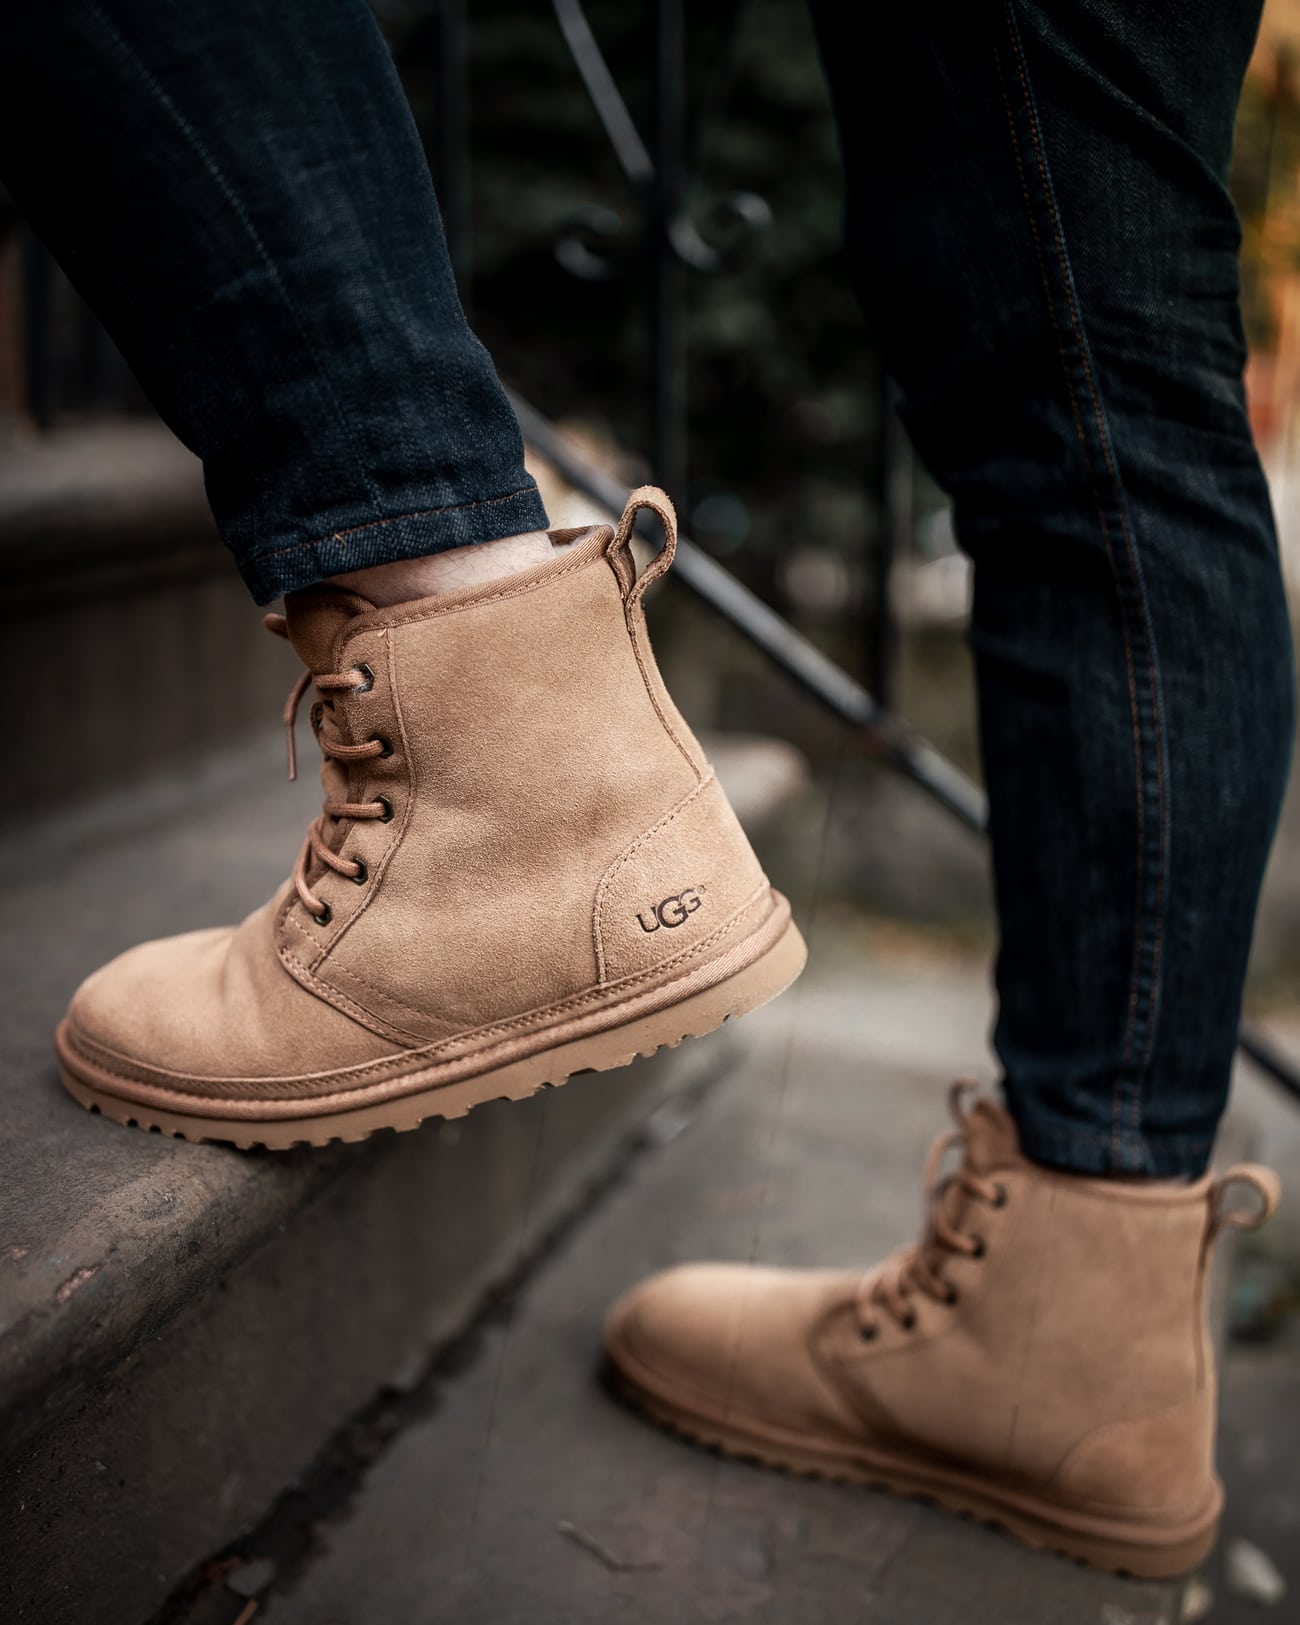 Style a Pair of Men's UGG Boots for Fall